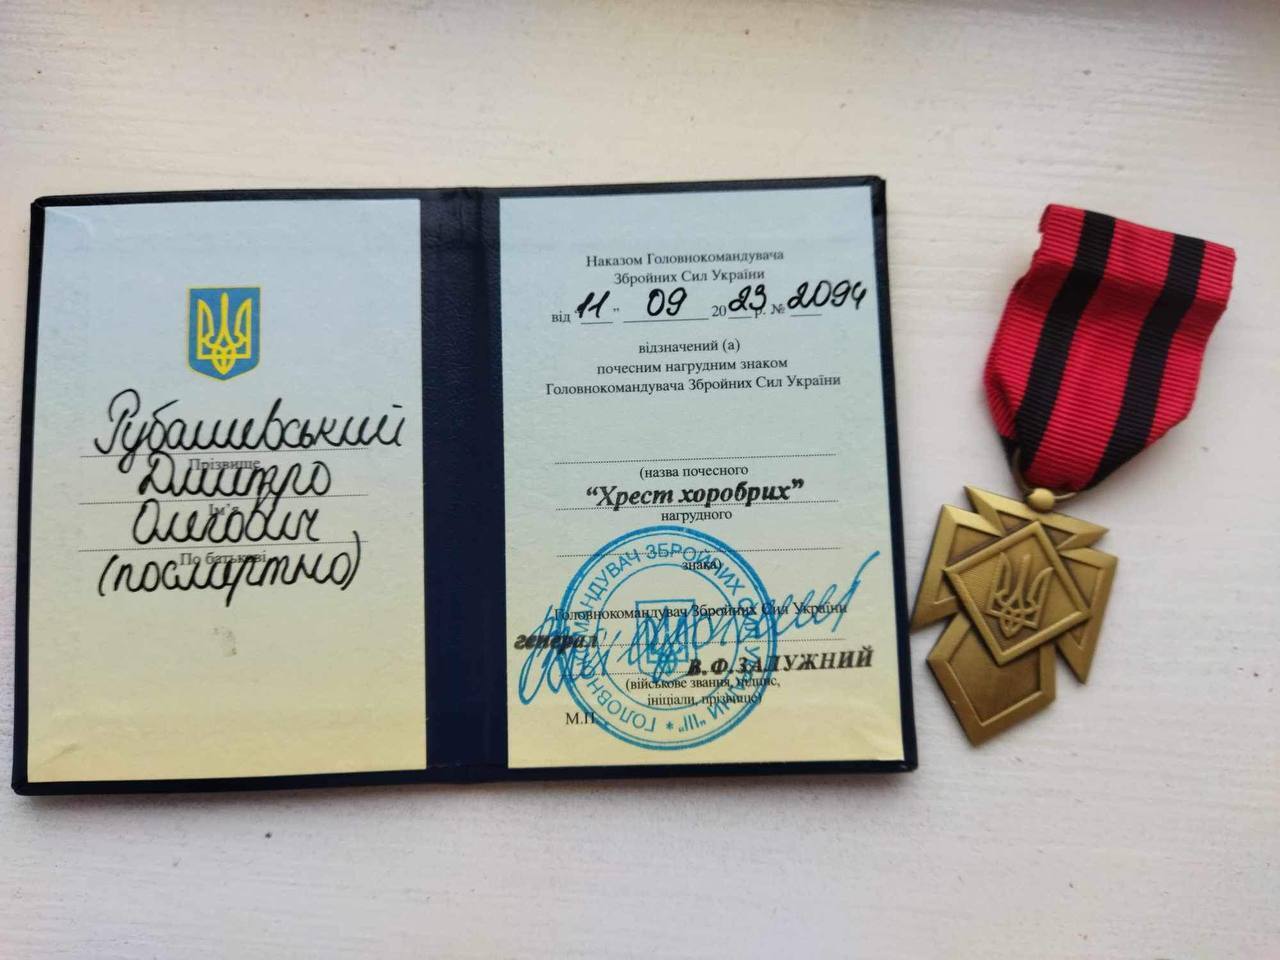 The little daughter of a volunteer from Belarus who died in Ukraine received the ''Cross of the Brave'' from Zaluzhnyi. Photo